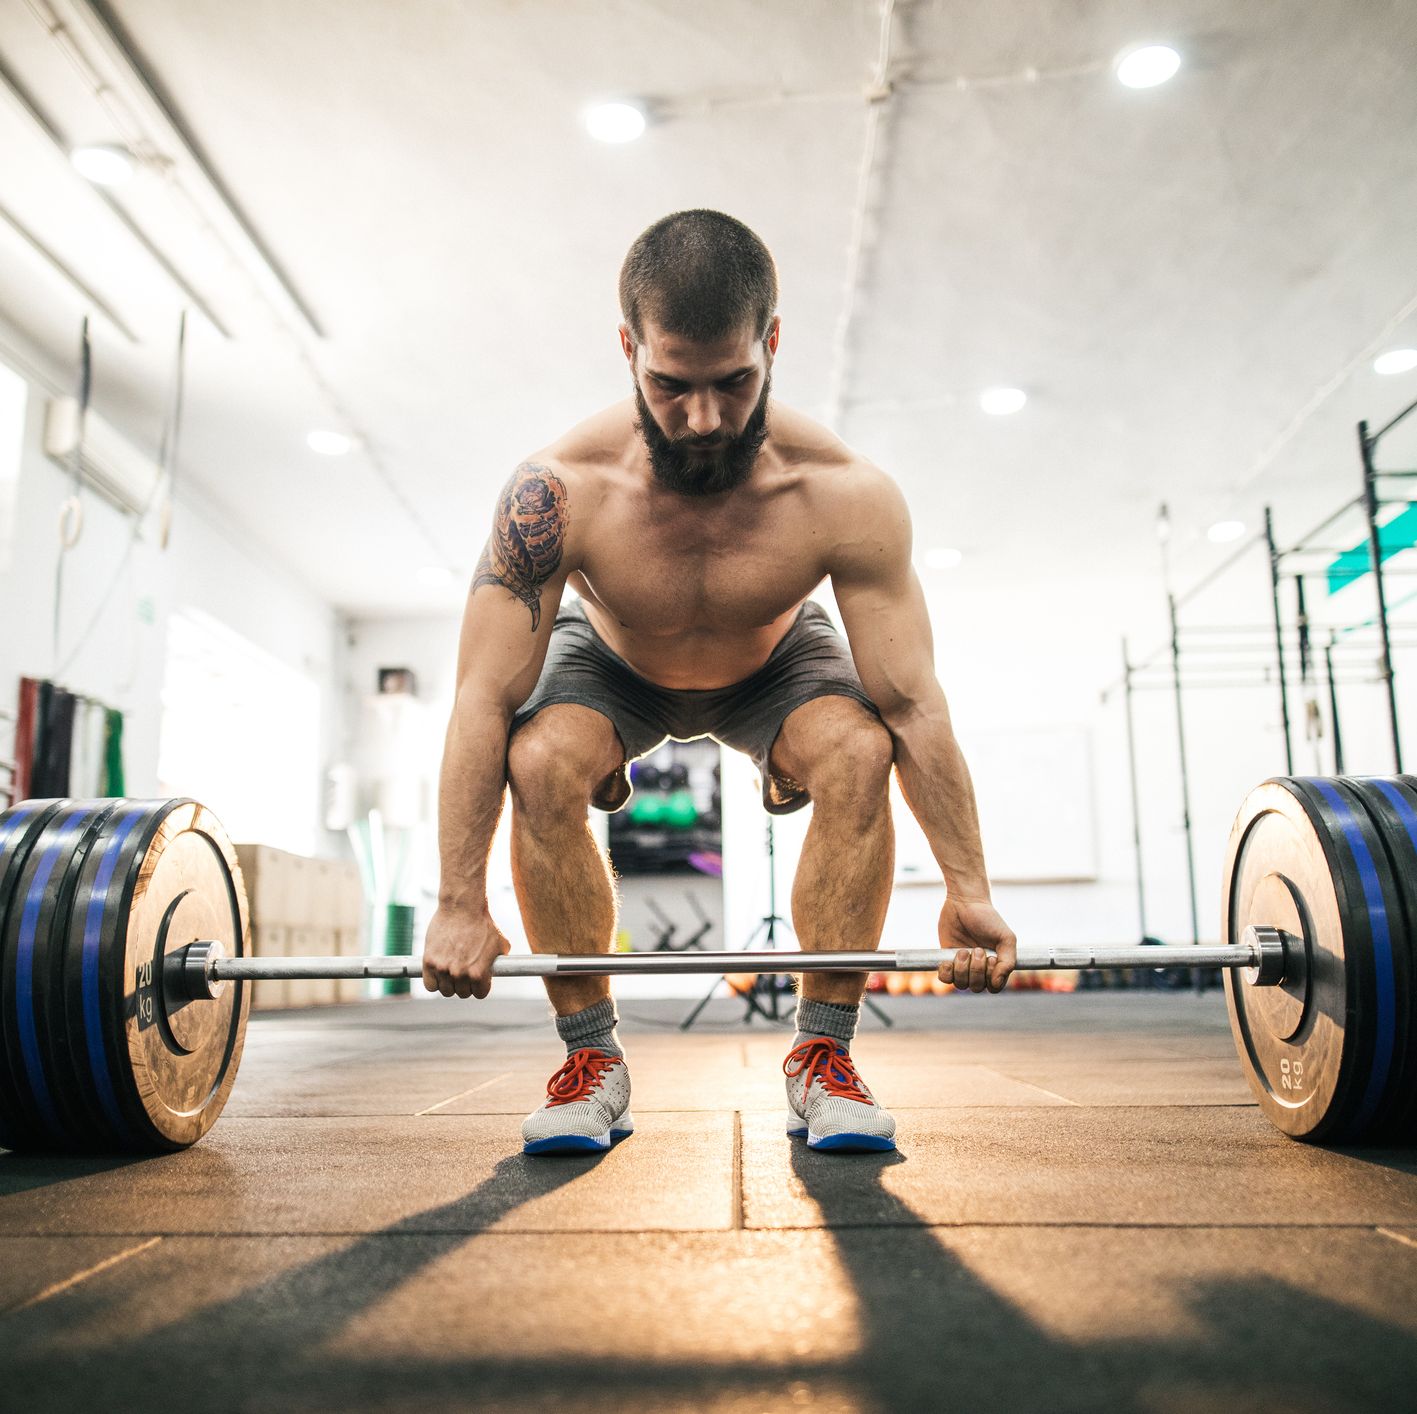 Barbell Deadlifts Are Overrated. Try These Exercises Instead.